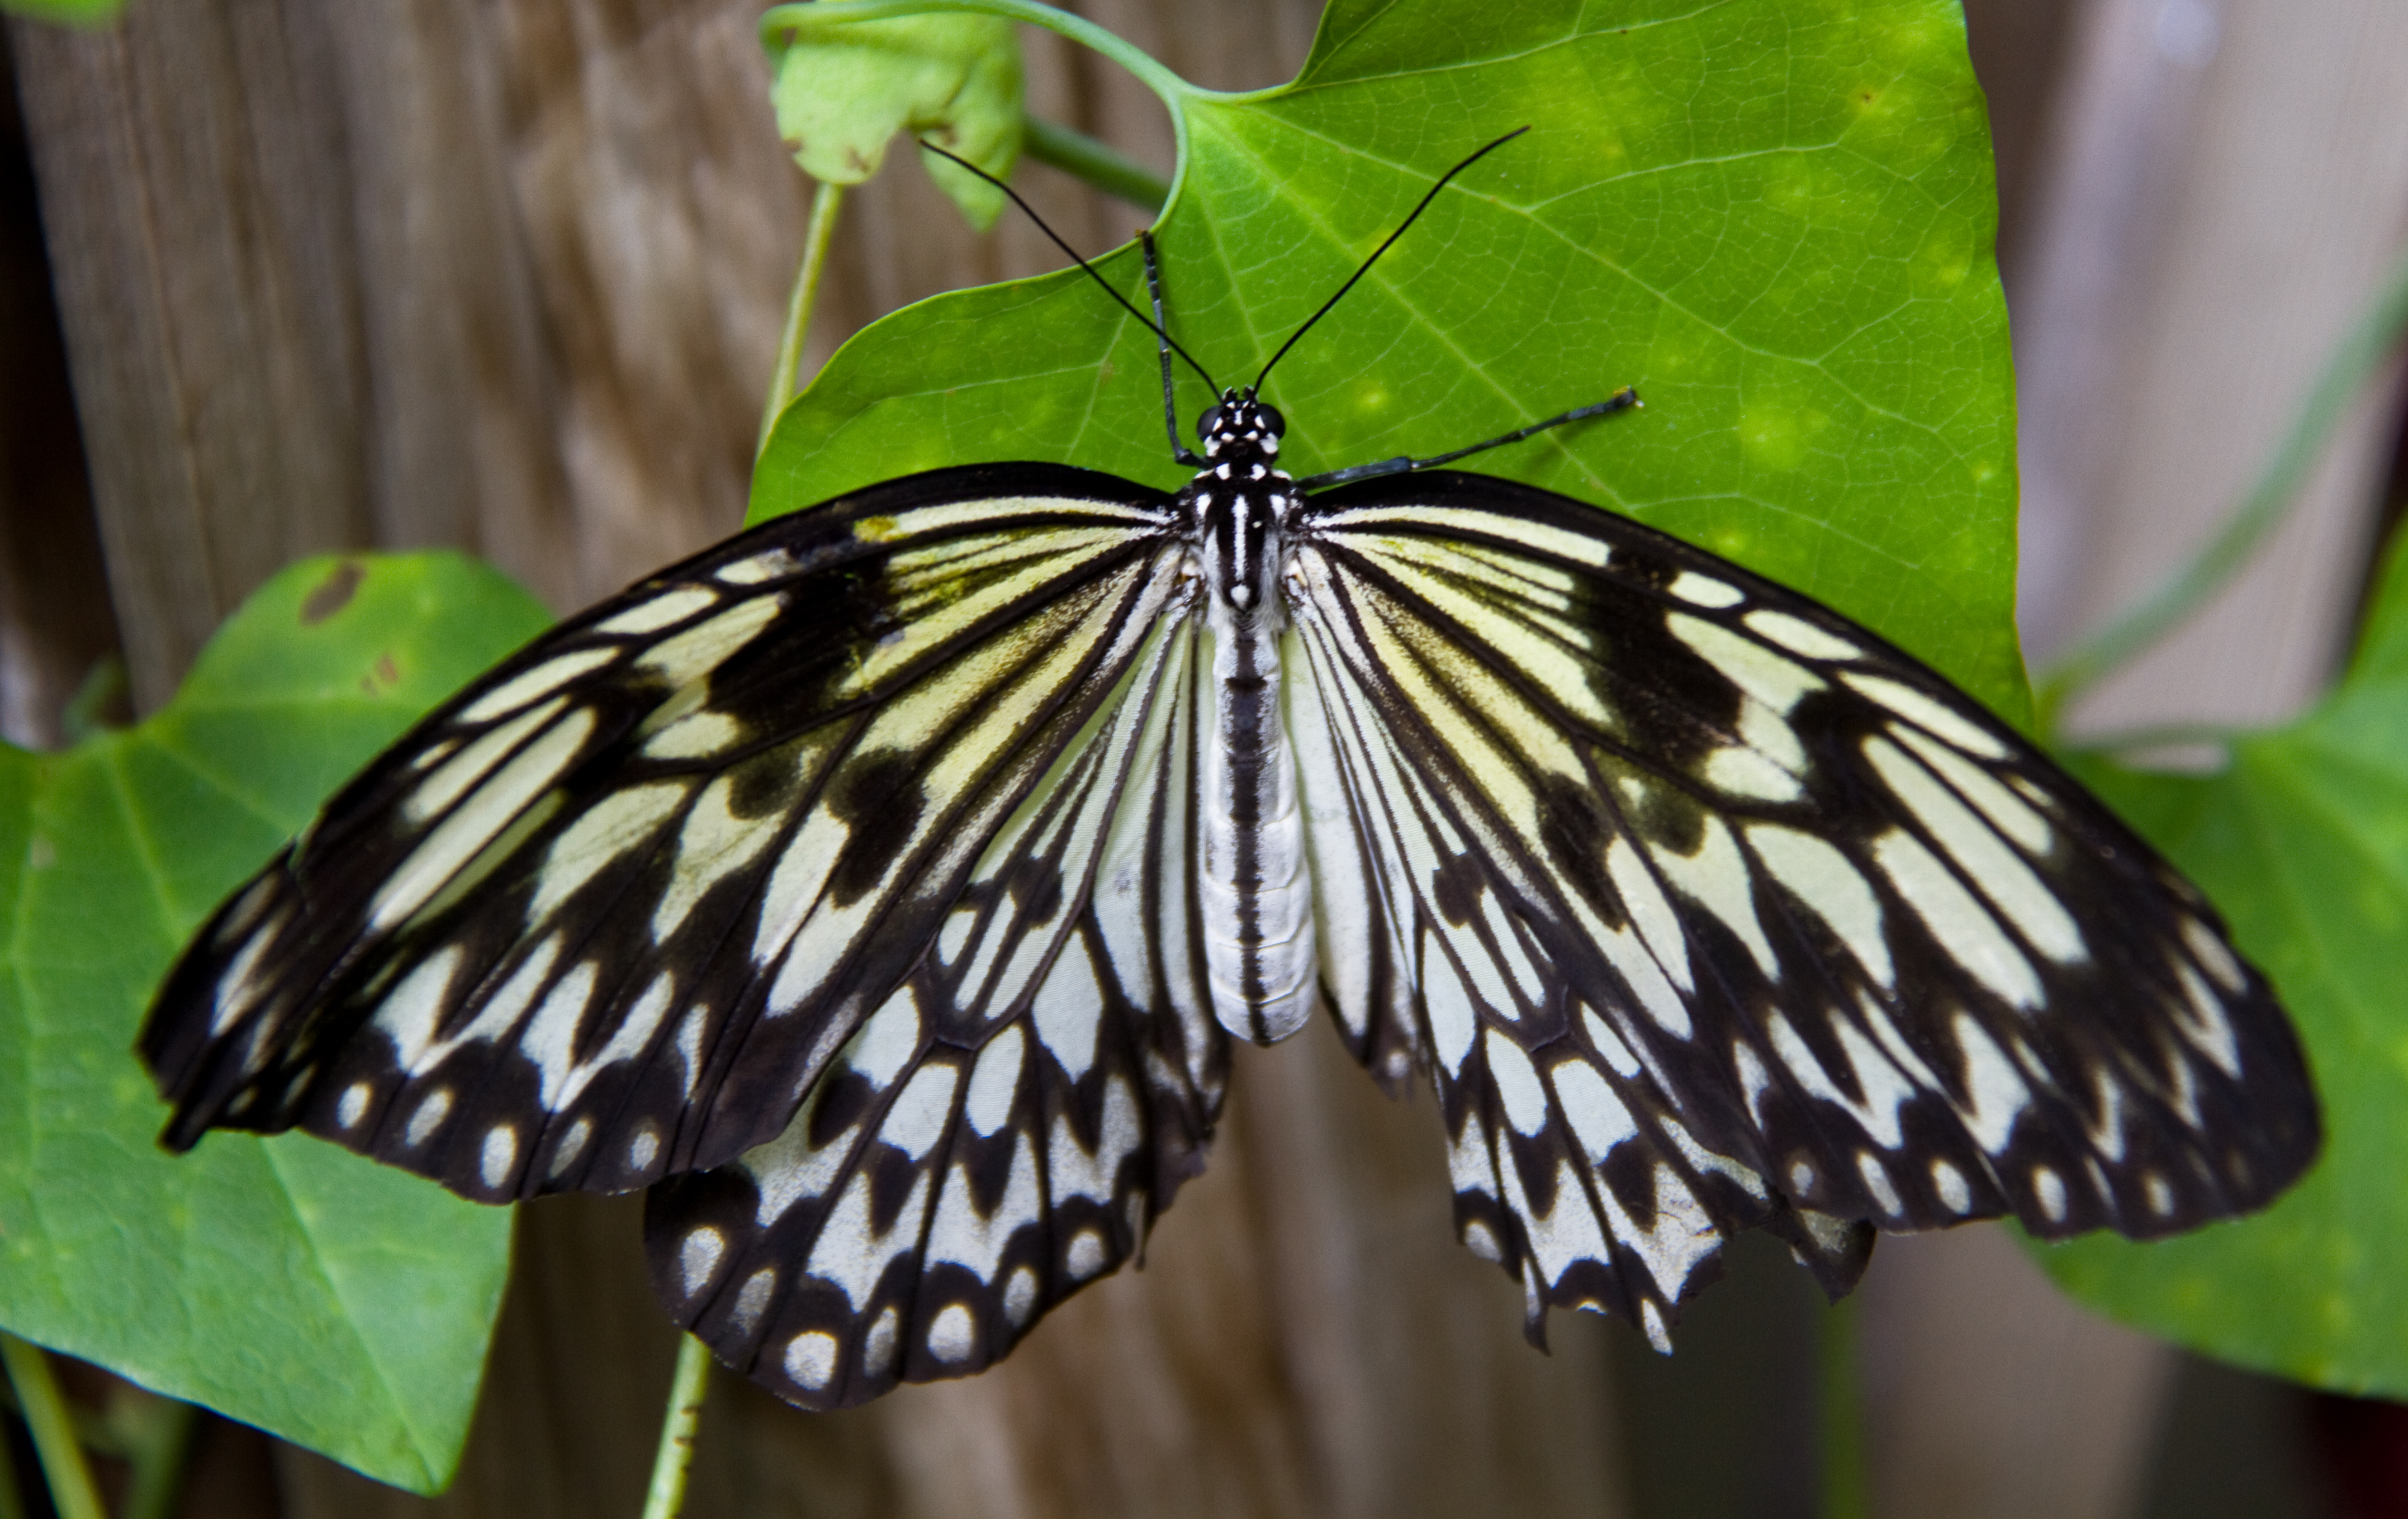 File:Black and White Butterfly 3 (7974366219).jpg - Wikimedia Commons